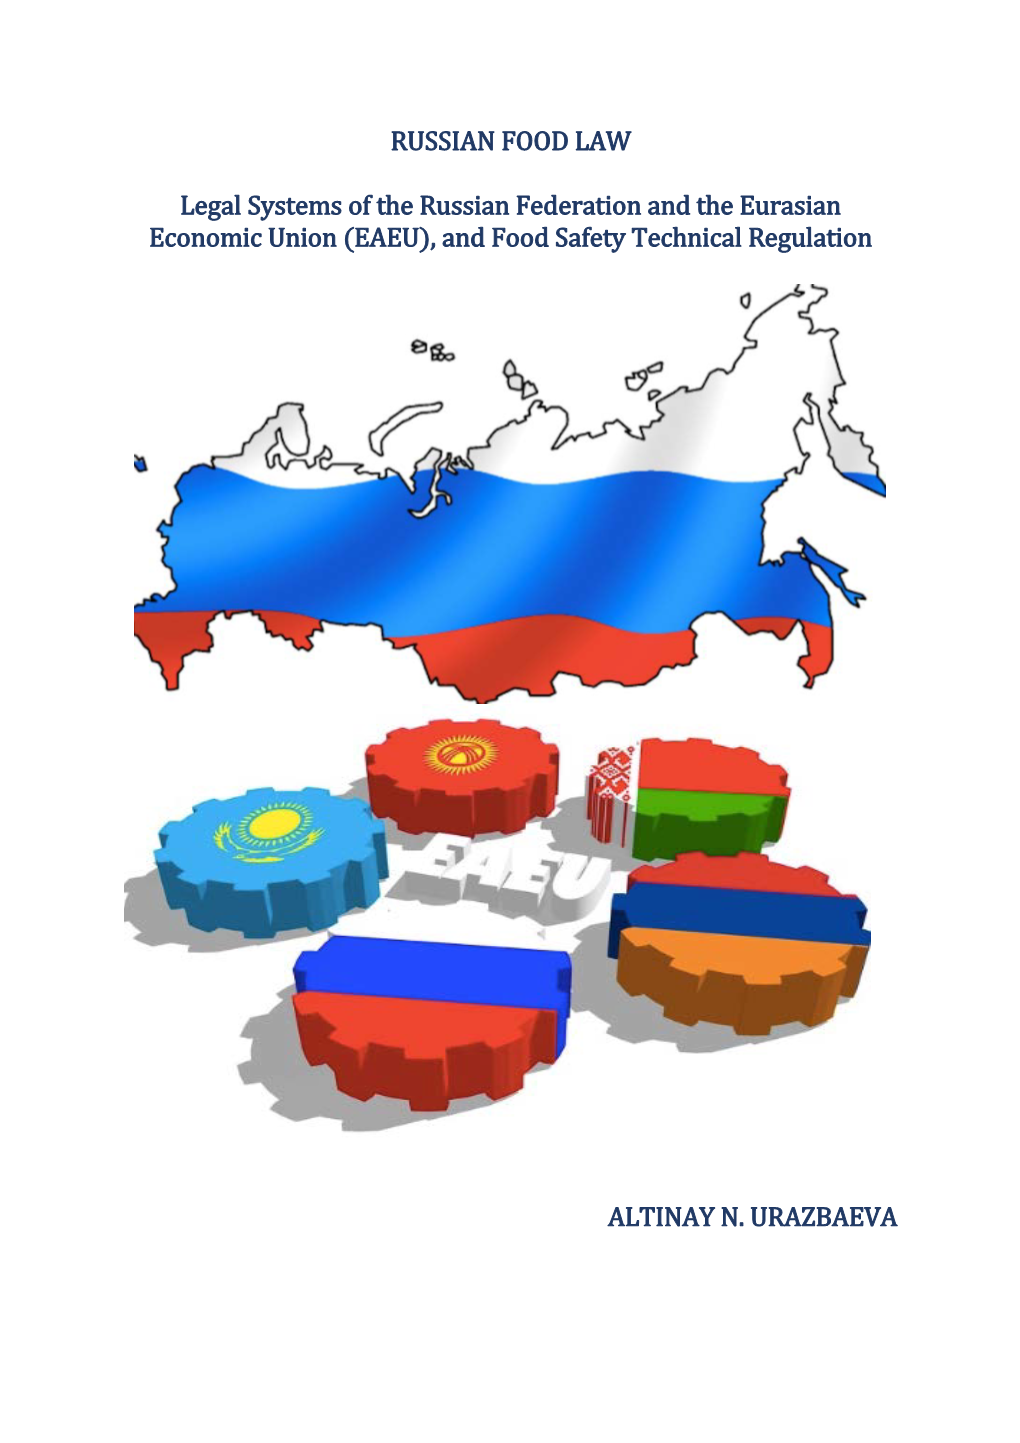 RUSSIAN FOOD LAW Legal Systems of the Russian